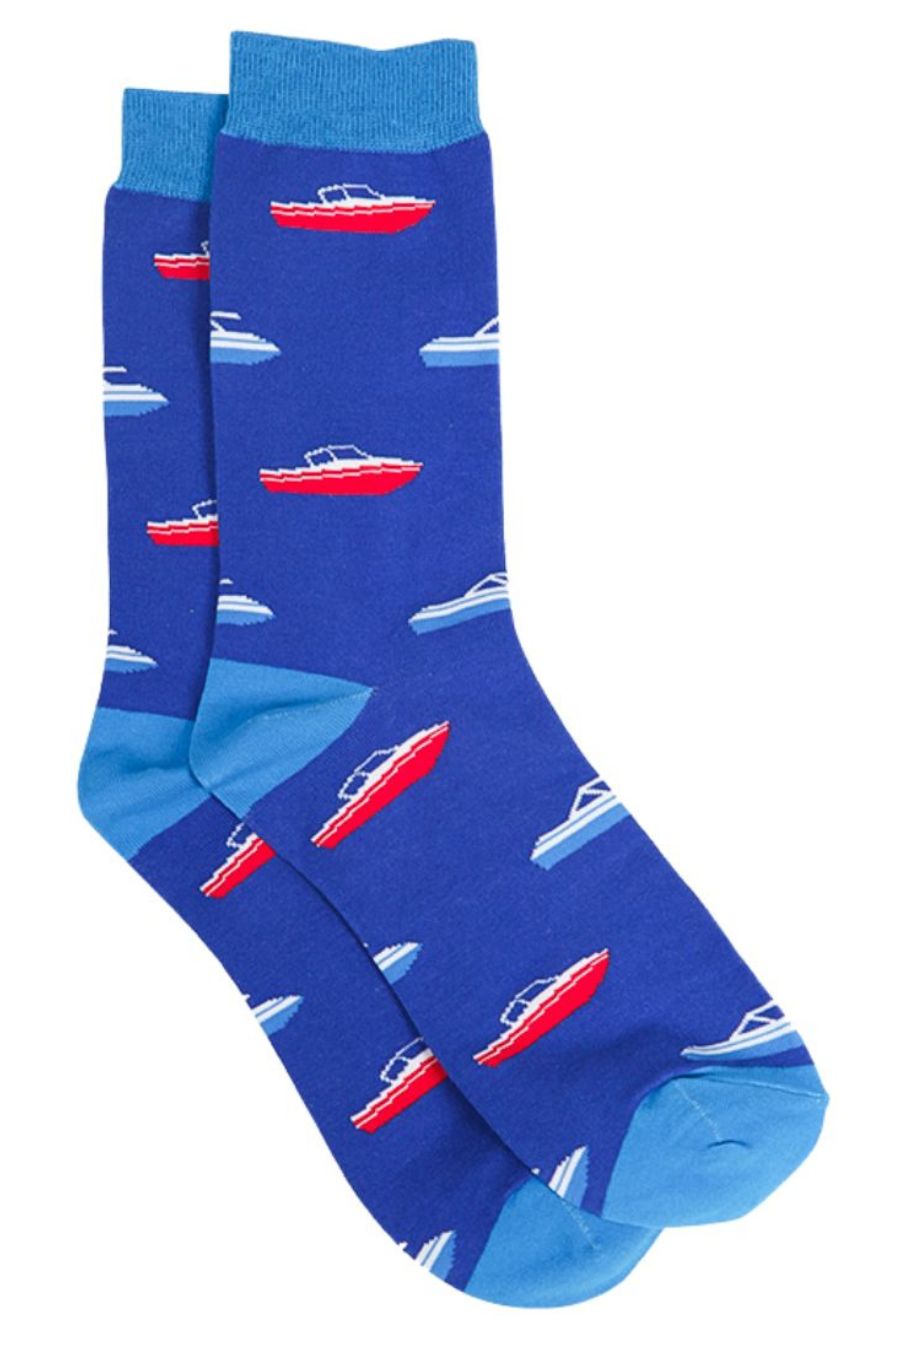 blue bamboo socks with red and blue speedboats